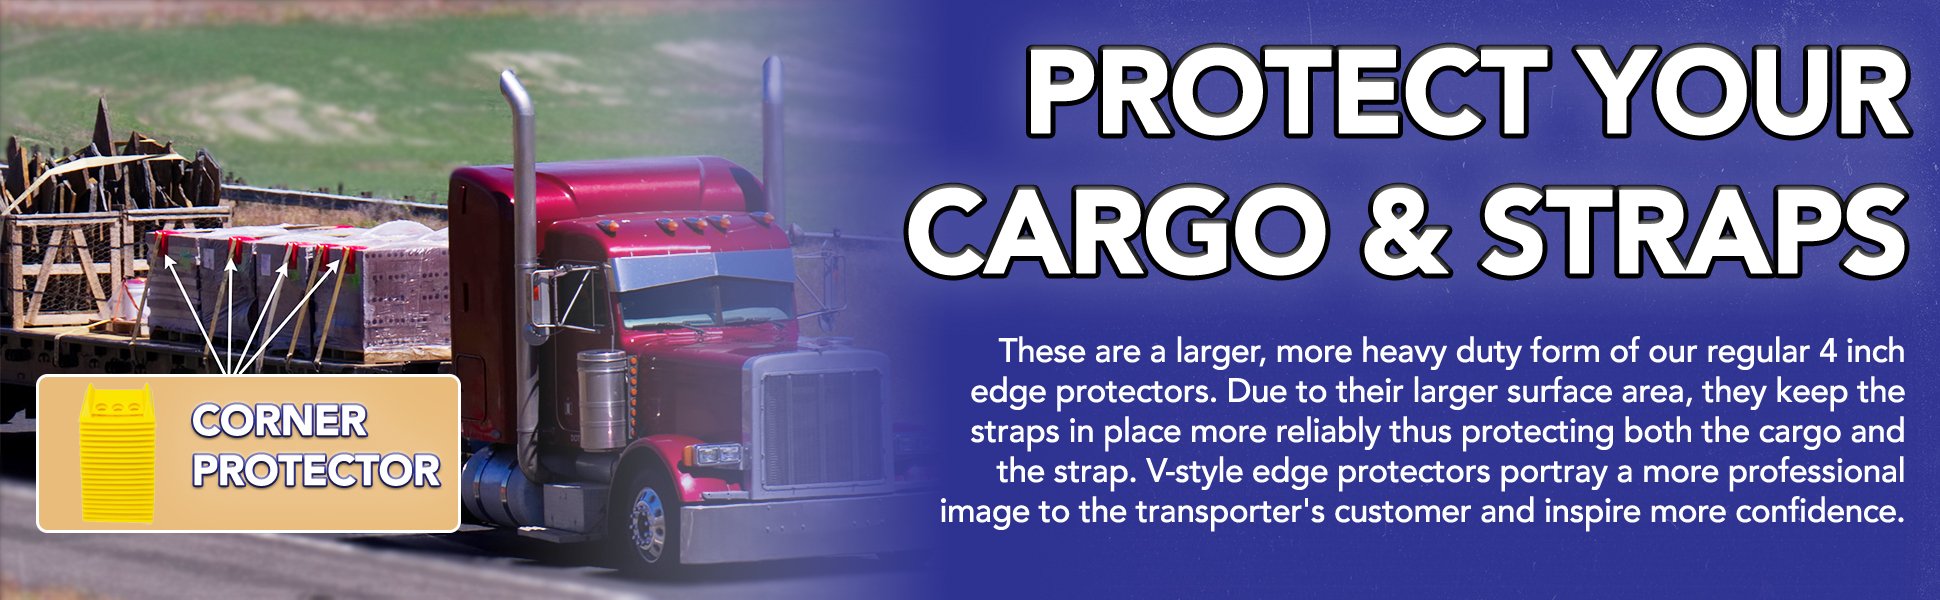 Protect your cargo protector